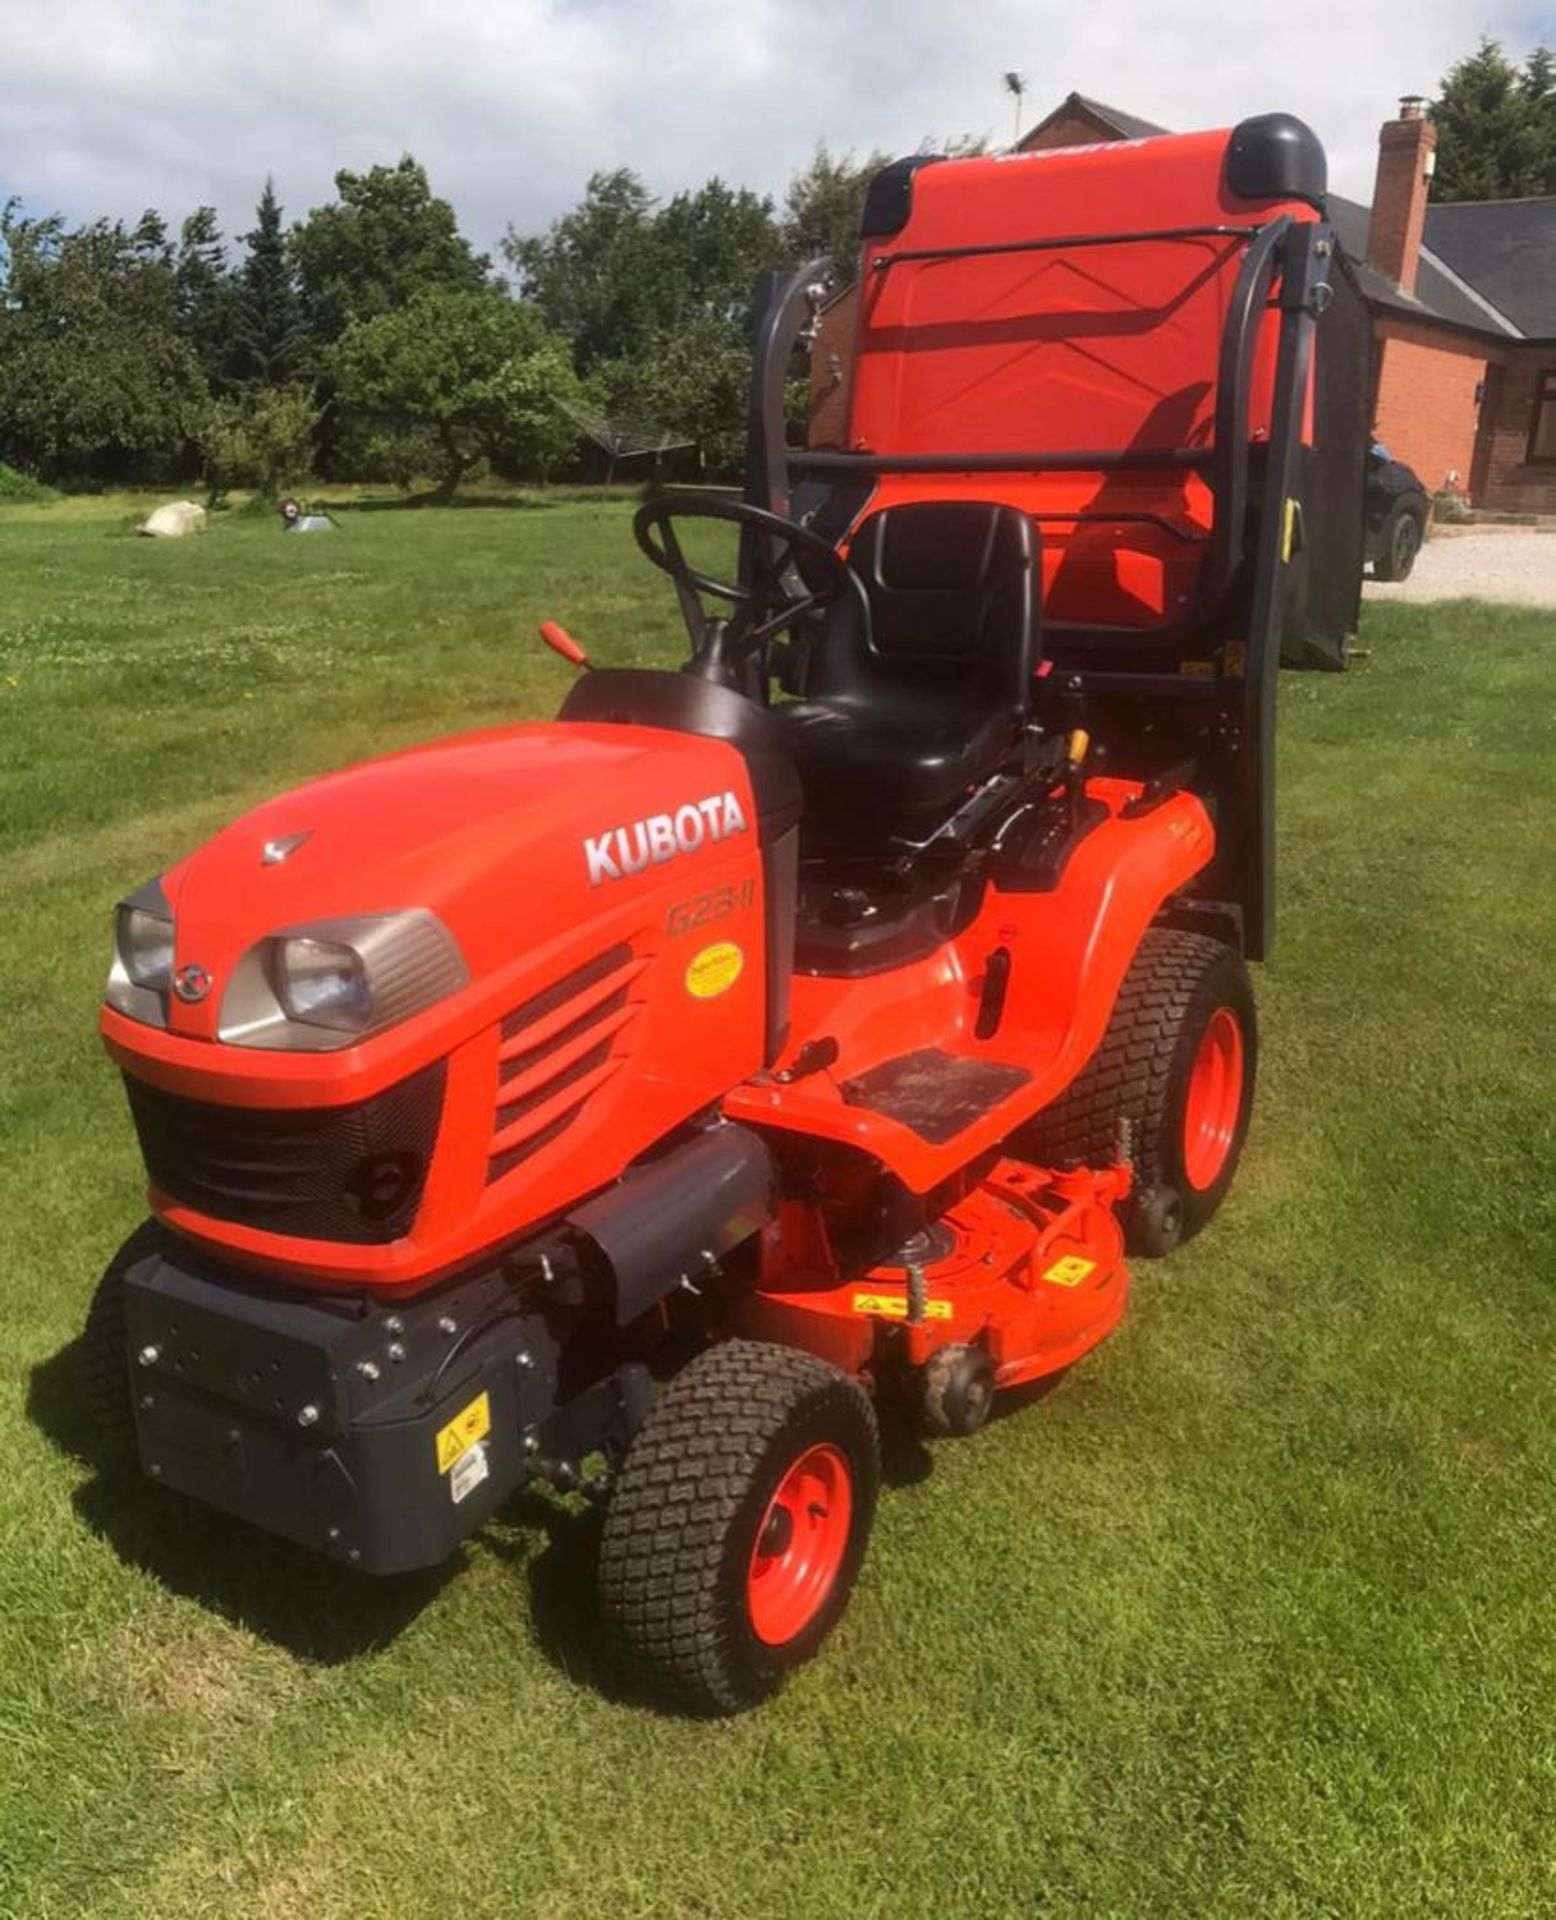 2015 KUBOTA G23-II RIDE ON MOWER, RUNS, DRIVES AND CUTS, EX DEMO CONDITION, LOW 200 HOURS *PLUS VAT* - Image 2 of 5